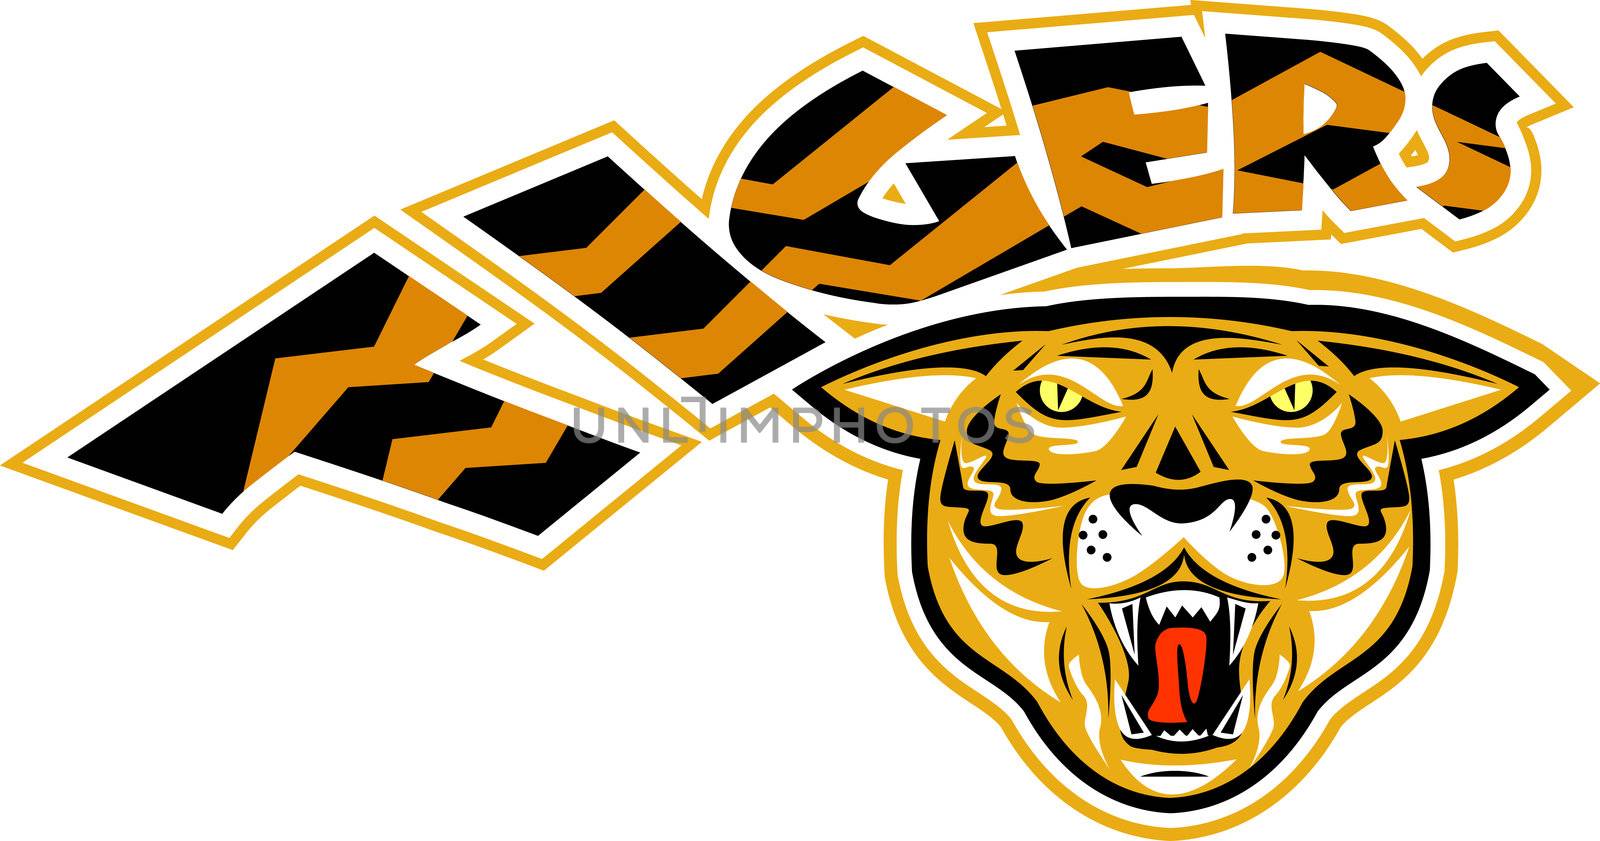 illustration of an angry tiger head  front view  with words "tigers" suitable for your rugby,soccer, football or any sports sporting club team mascot